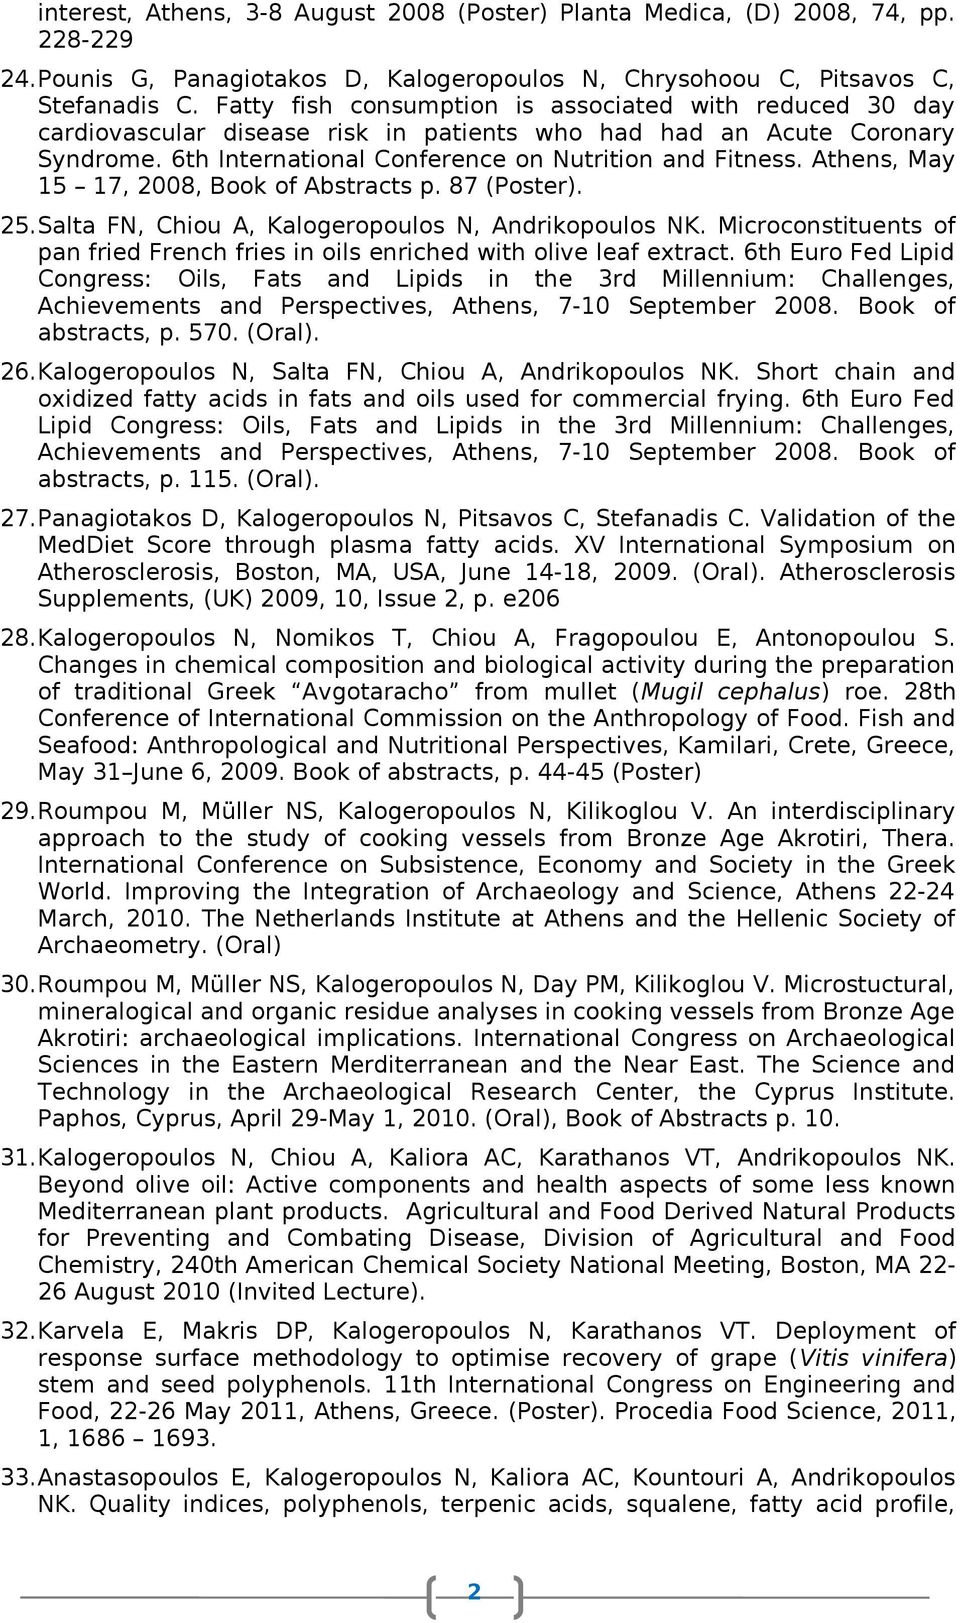 Athens, May 15 17, 008, Book of Abstracts p. 87 (Poster). 5.Salta FN, Chiou A, Kalogeropoulos N, Andrikopoulos NK. Microconstituents of pan fried French fries in oils enriched with olive leaf extract.